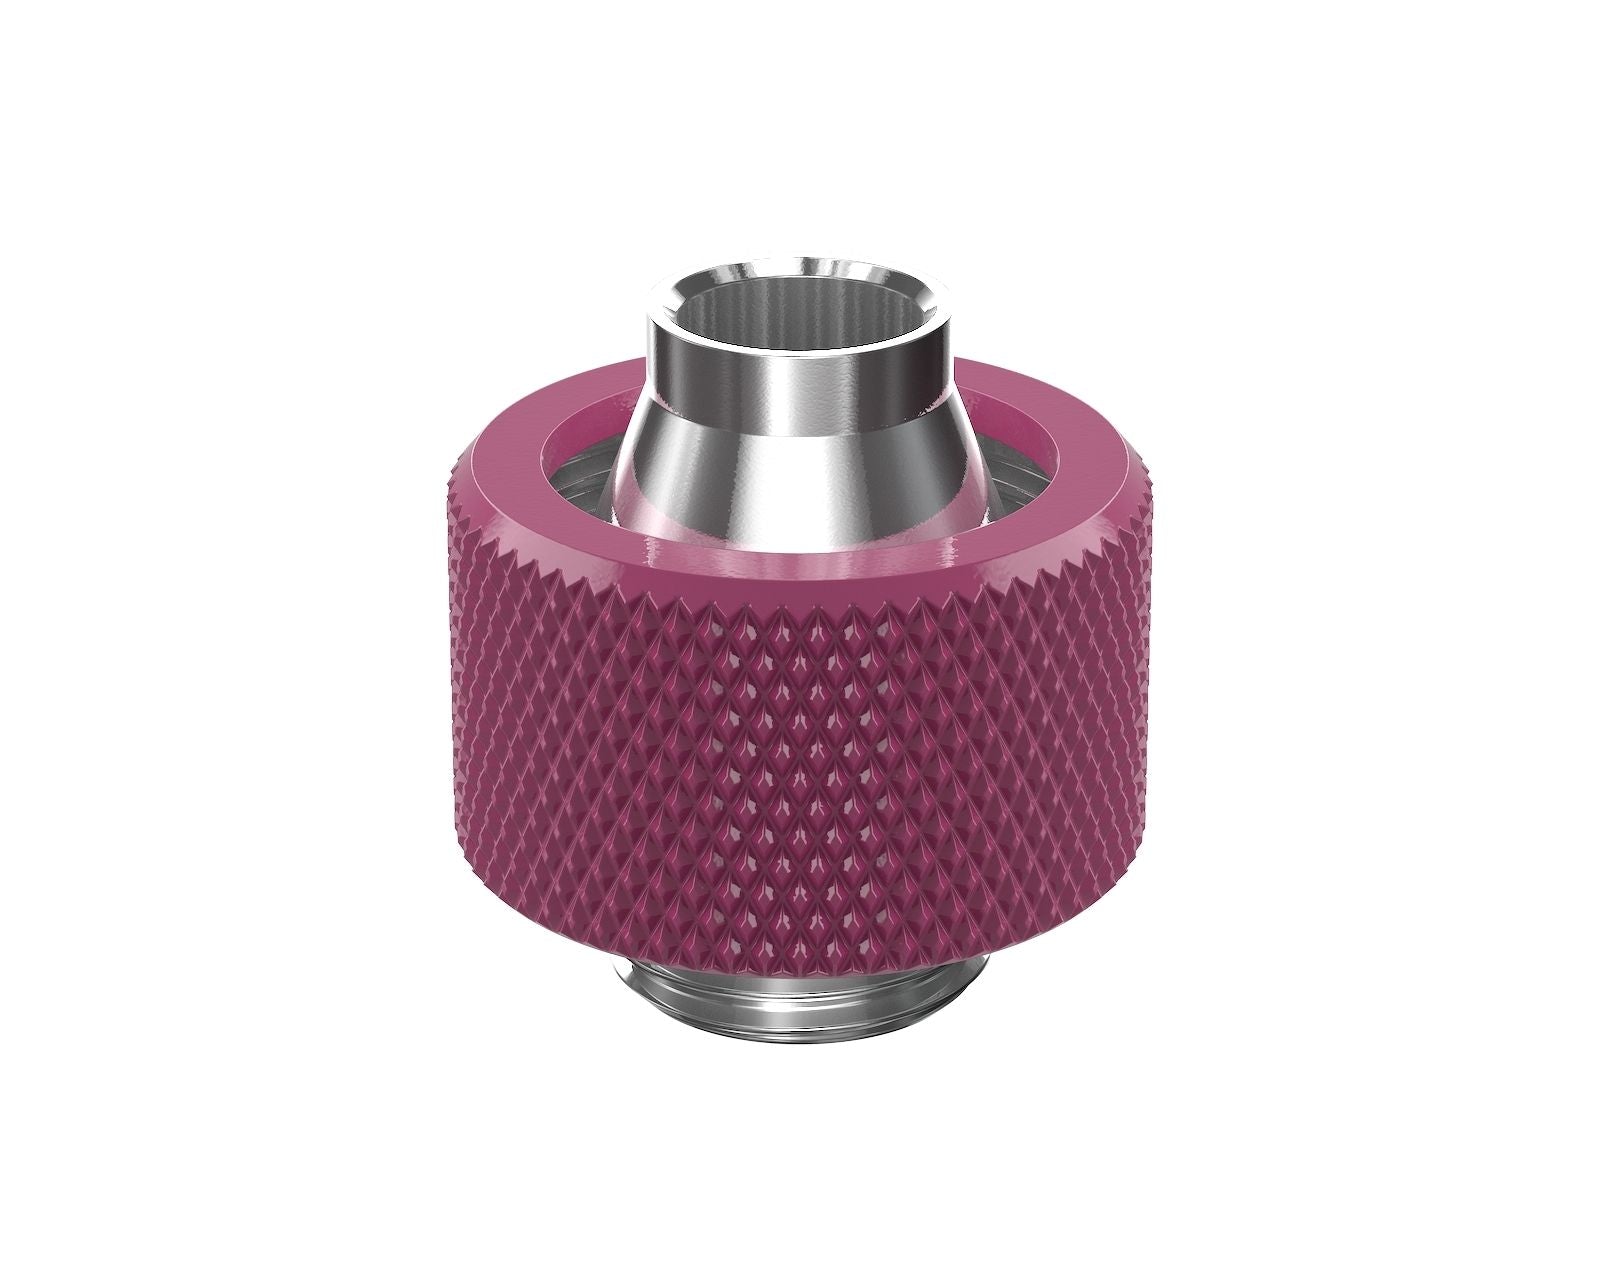 PrimoChill SecureFit SX - Premium Compression Fitting For 3/8in ID x 5/8in OD Flexible Tubing (F-SFSX58) - Available in 20+ Colors, Custom Watercooling Loop Ready - Magenta